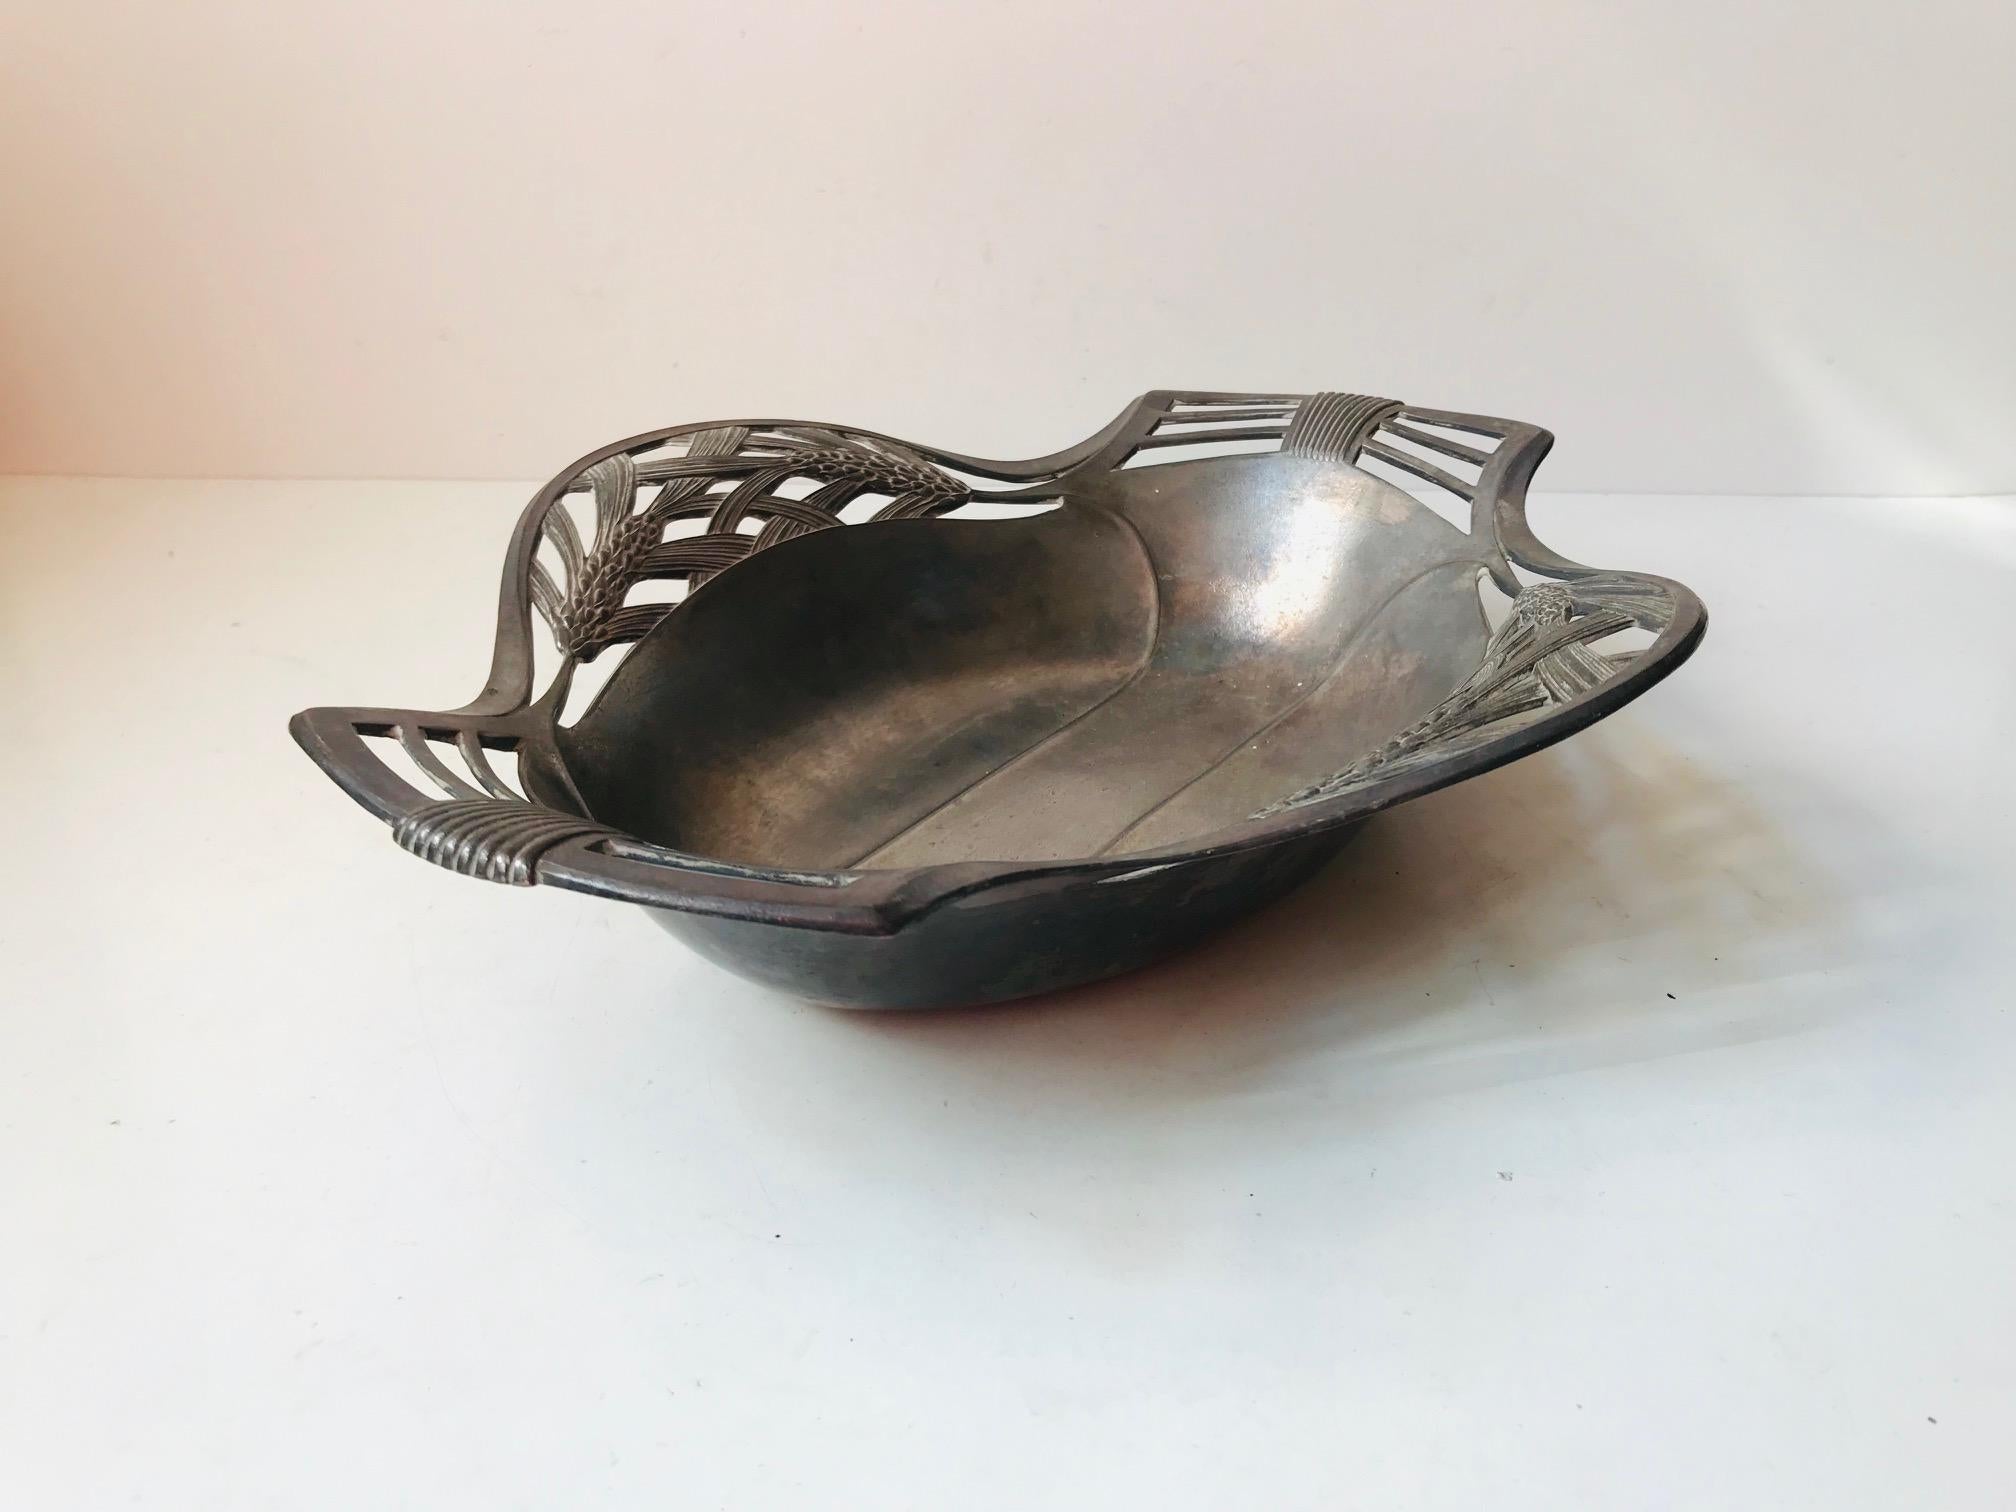 - A decorative fruit/bread basket or tray
- Made of partially perforated pewter
- With intricate details and fine period features
- It is numbered and signed by an anonymous French maker beneath the base.